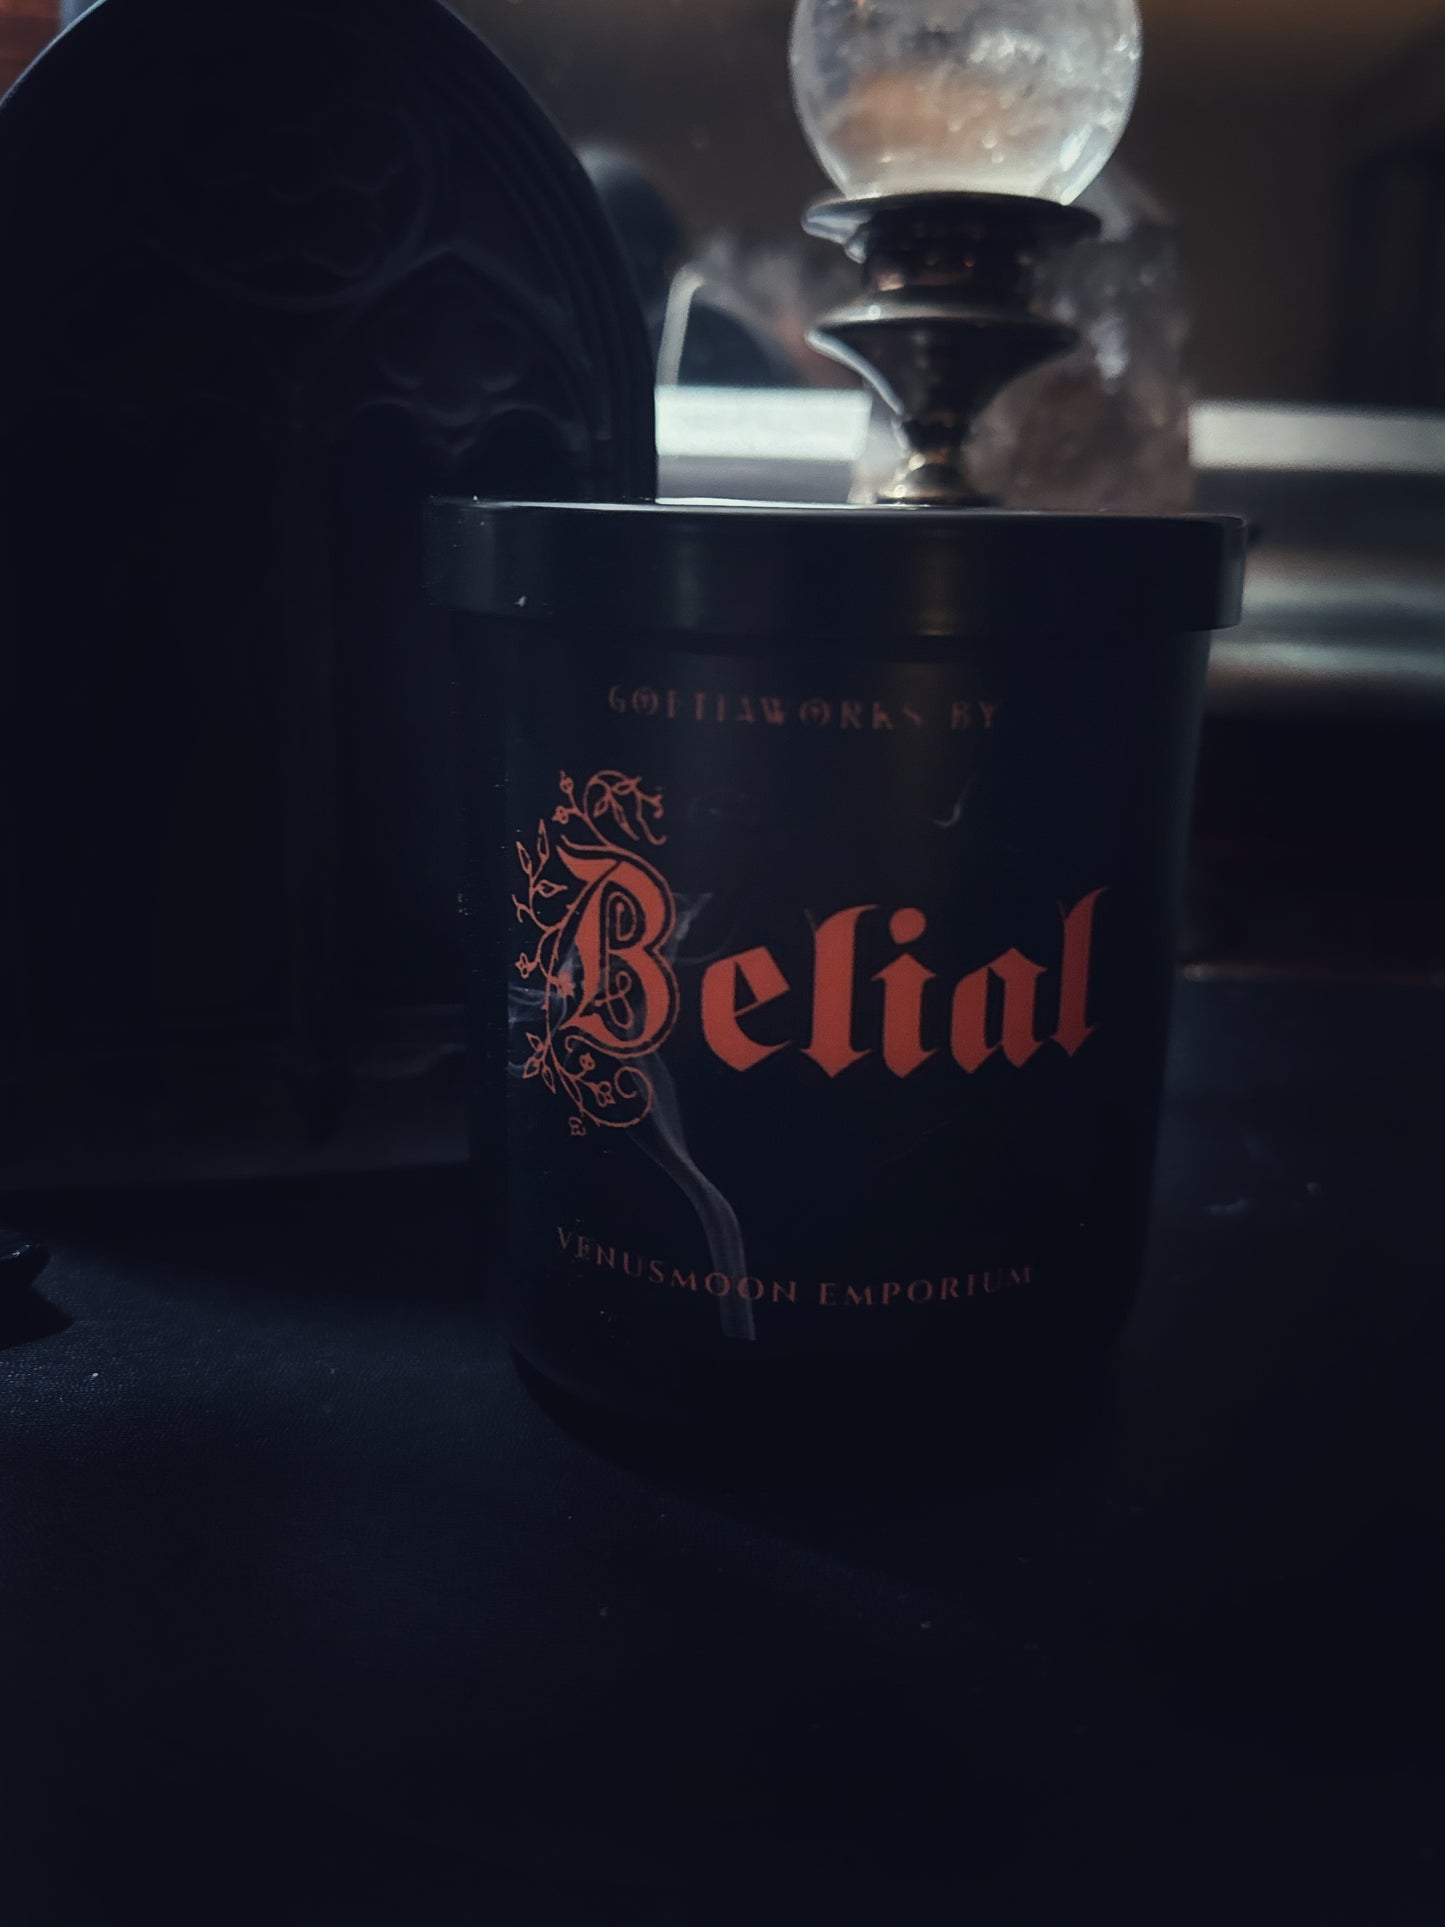 GOETIAWORKS Candle No. 68 Belial